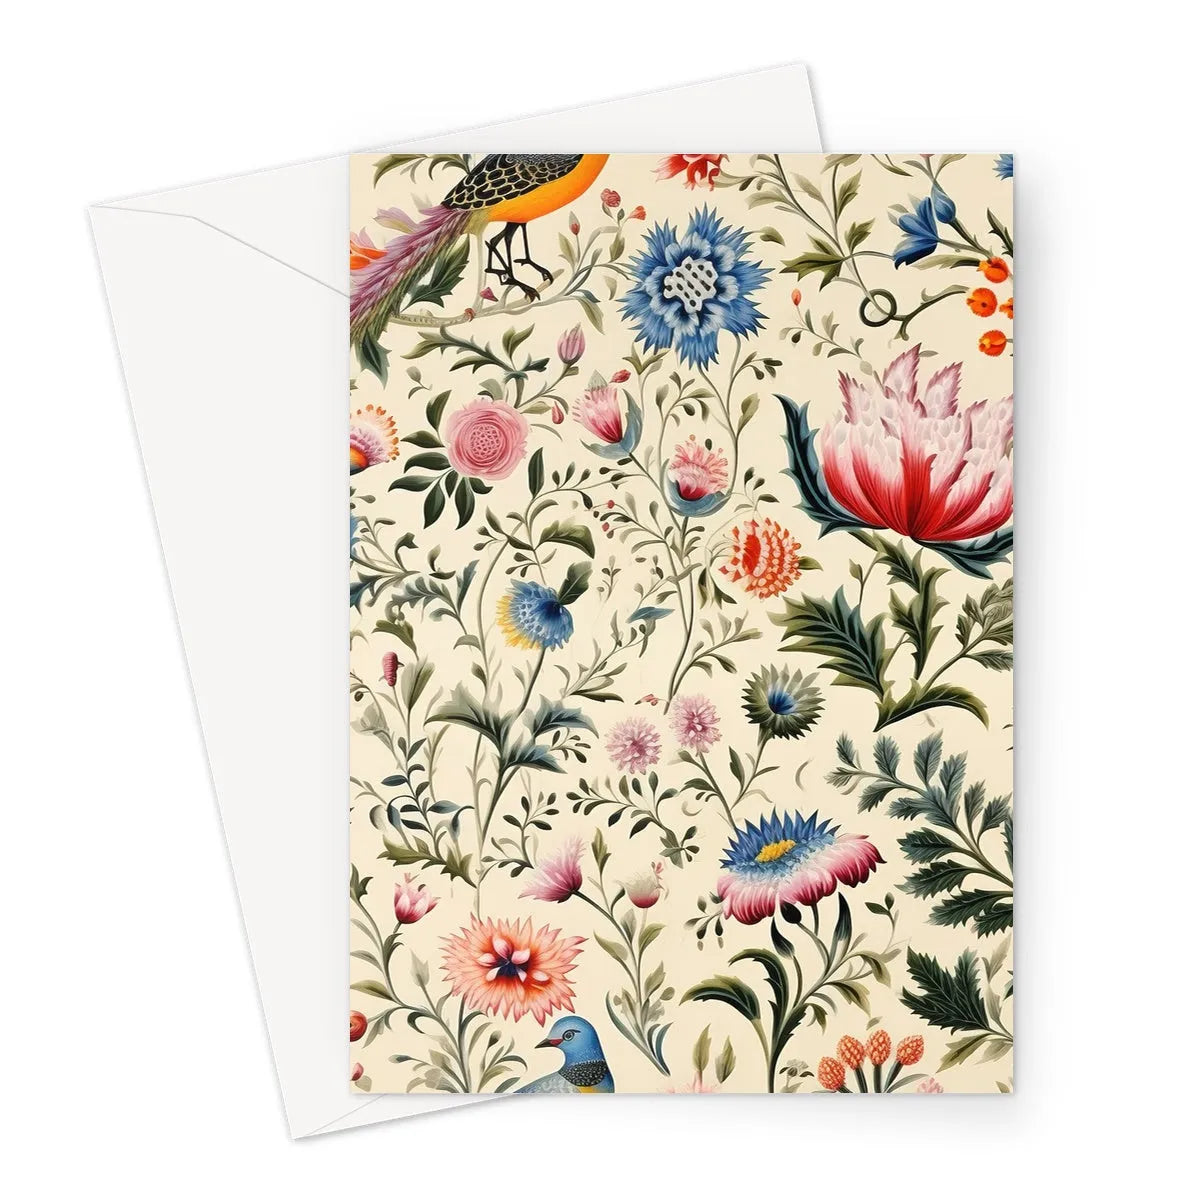 Wildflower Hoopla Greeting Card - A5 Portrait / 1 Card - Notebooks & Notepads - Aesthetic Art